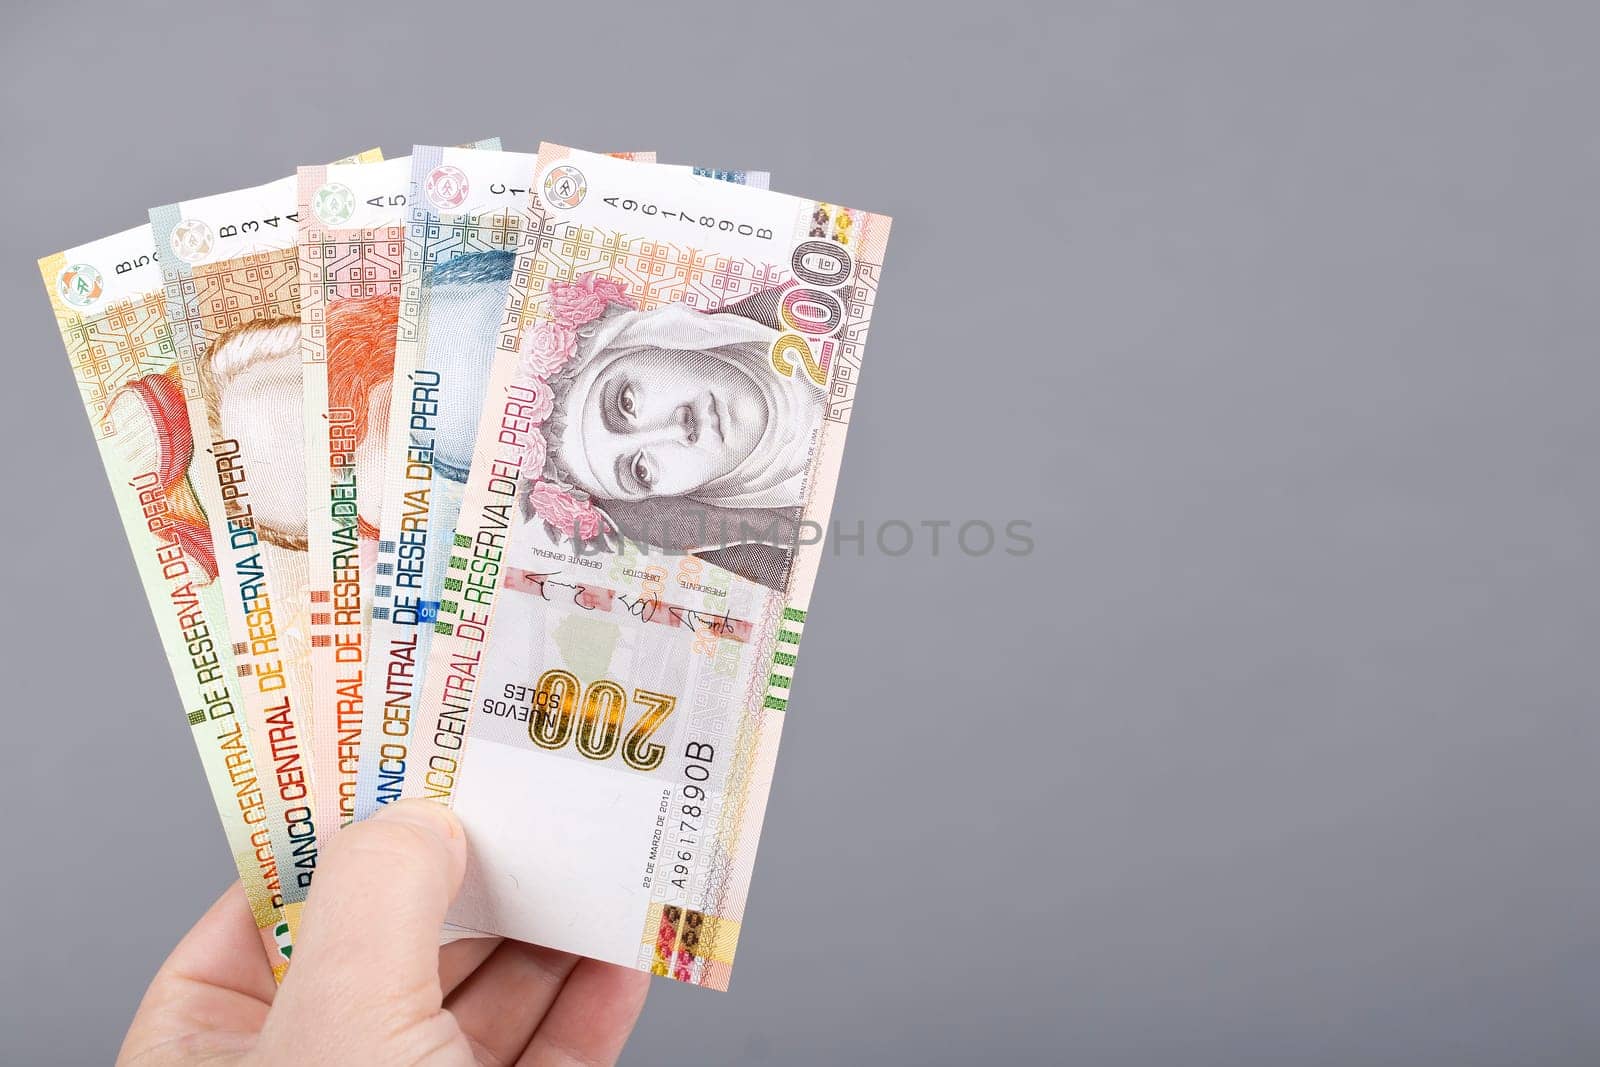 Peruvian money - Soles in the hand on a gray background